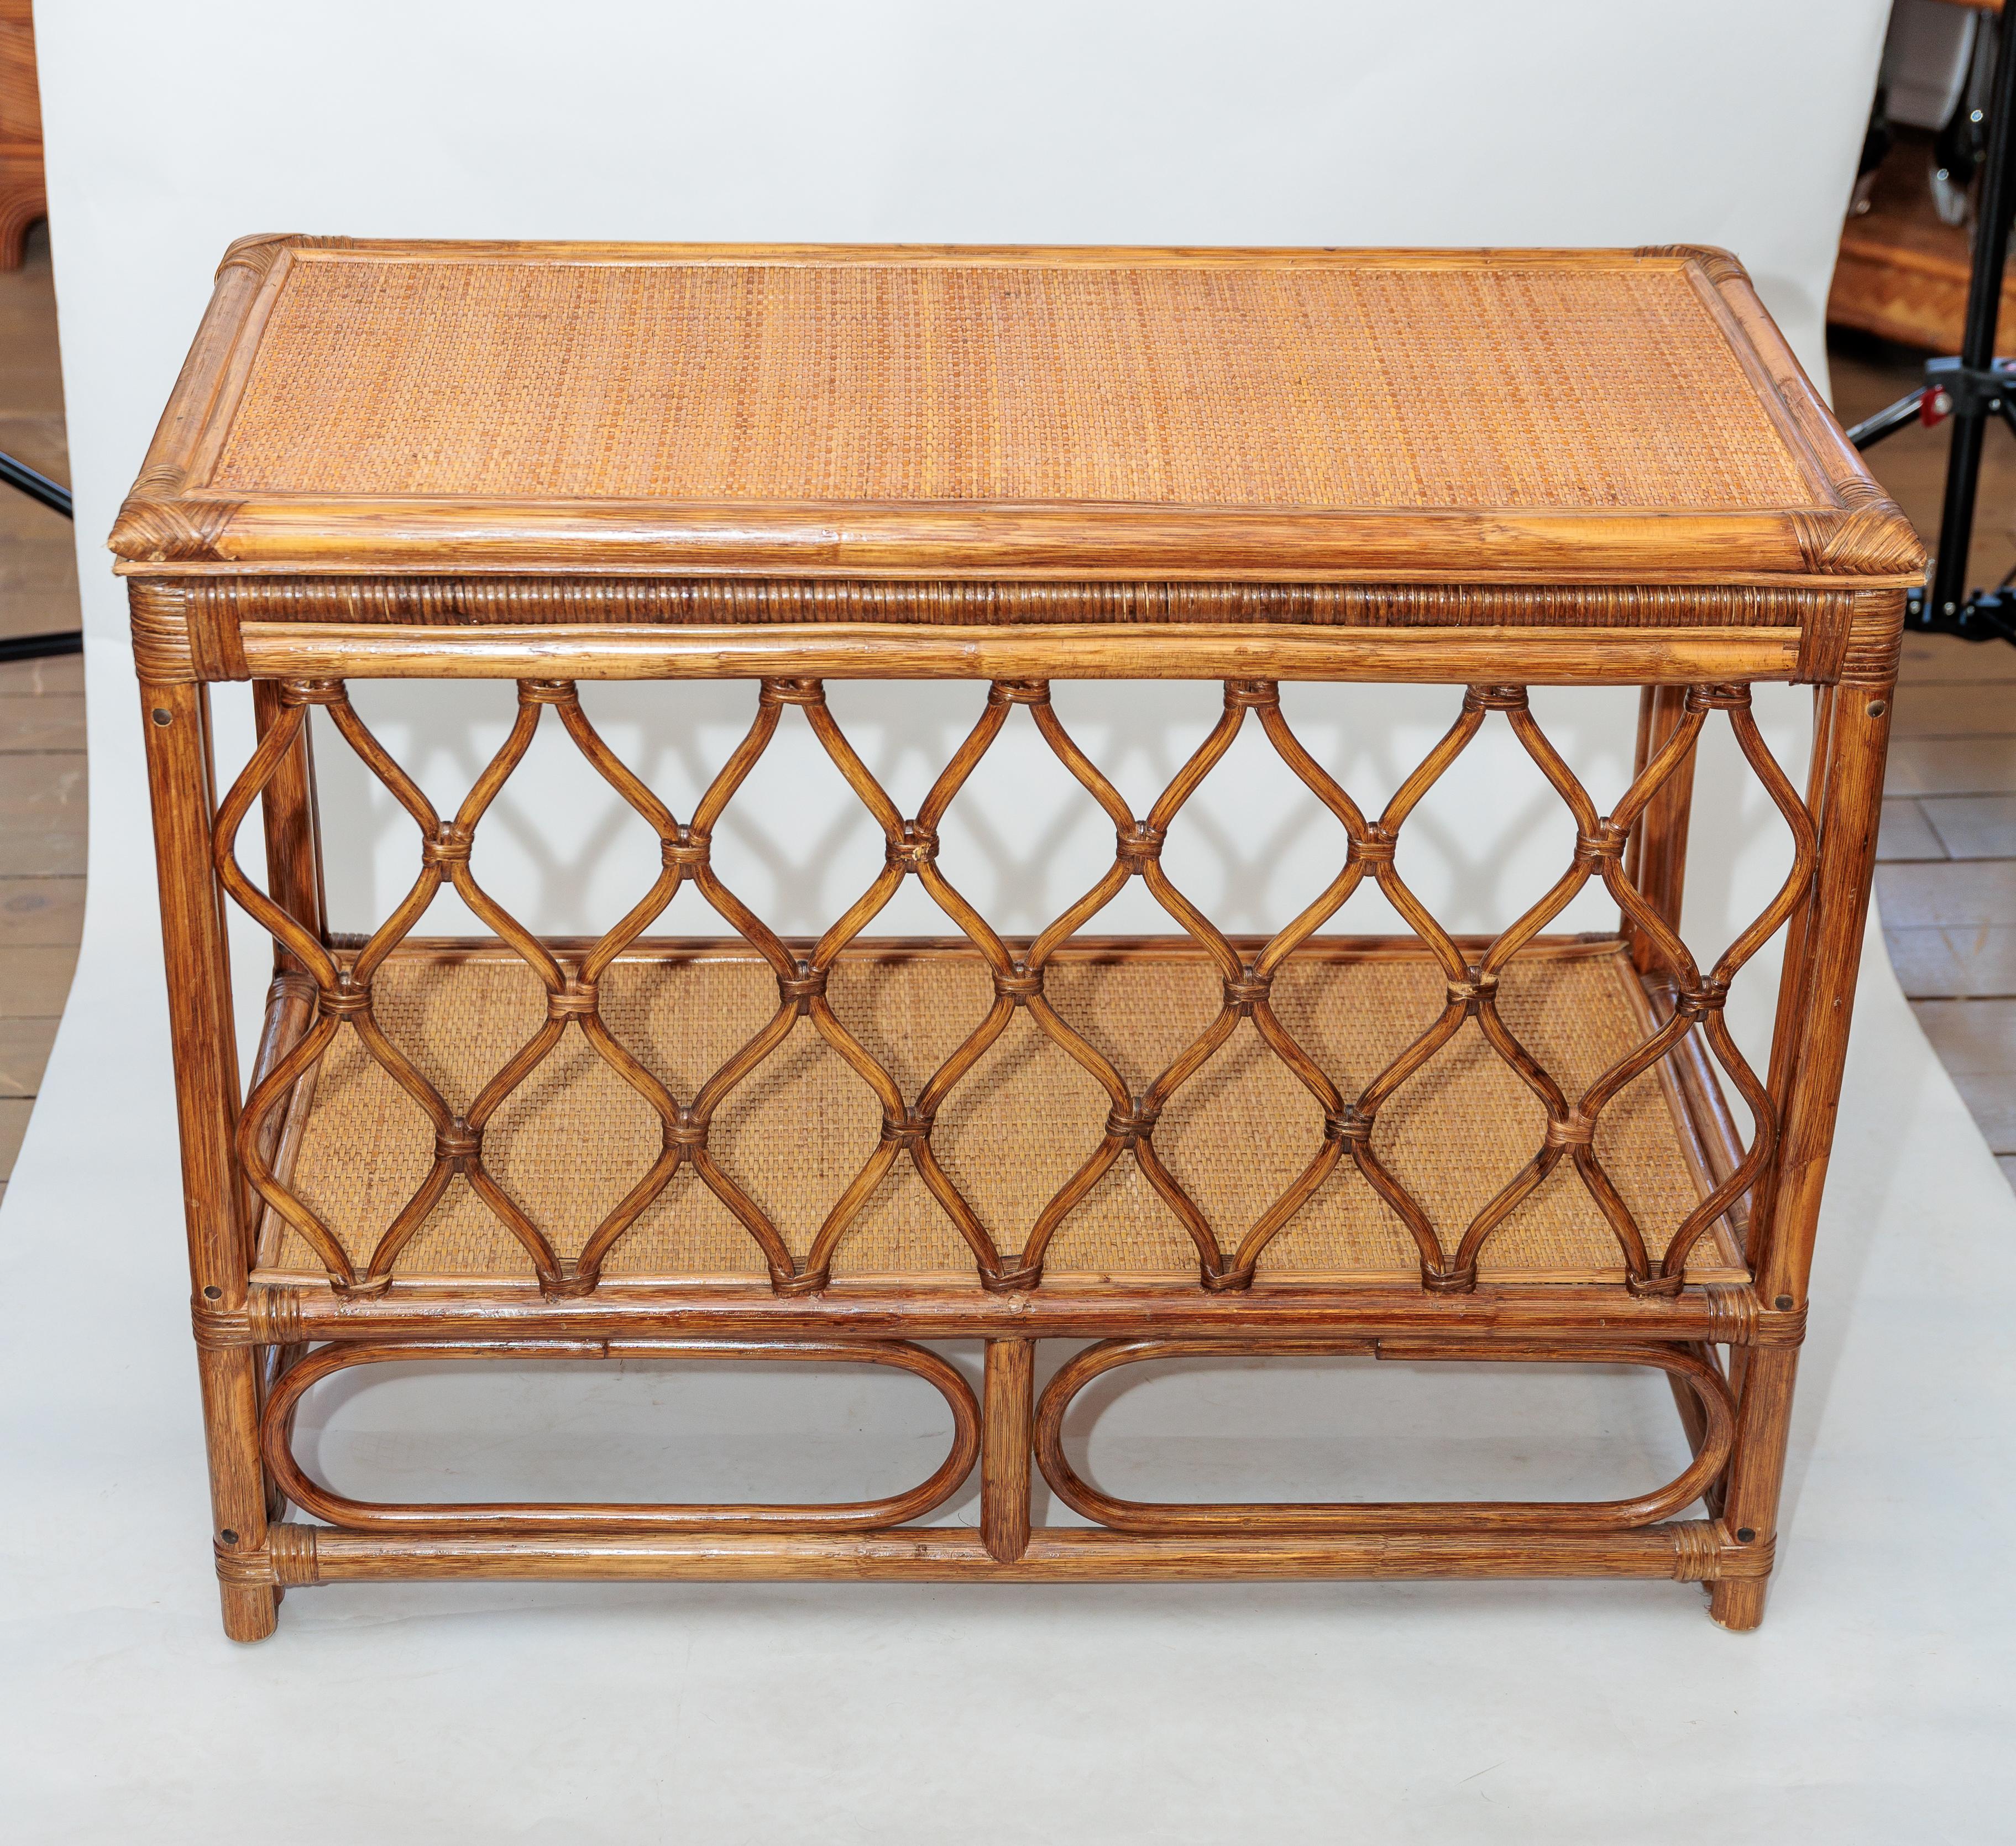 Pair of Bamboo and Rattan Tables with Woven Back Detail and Shelf 1